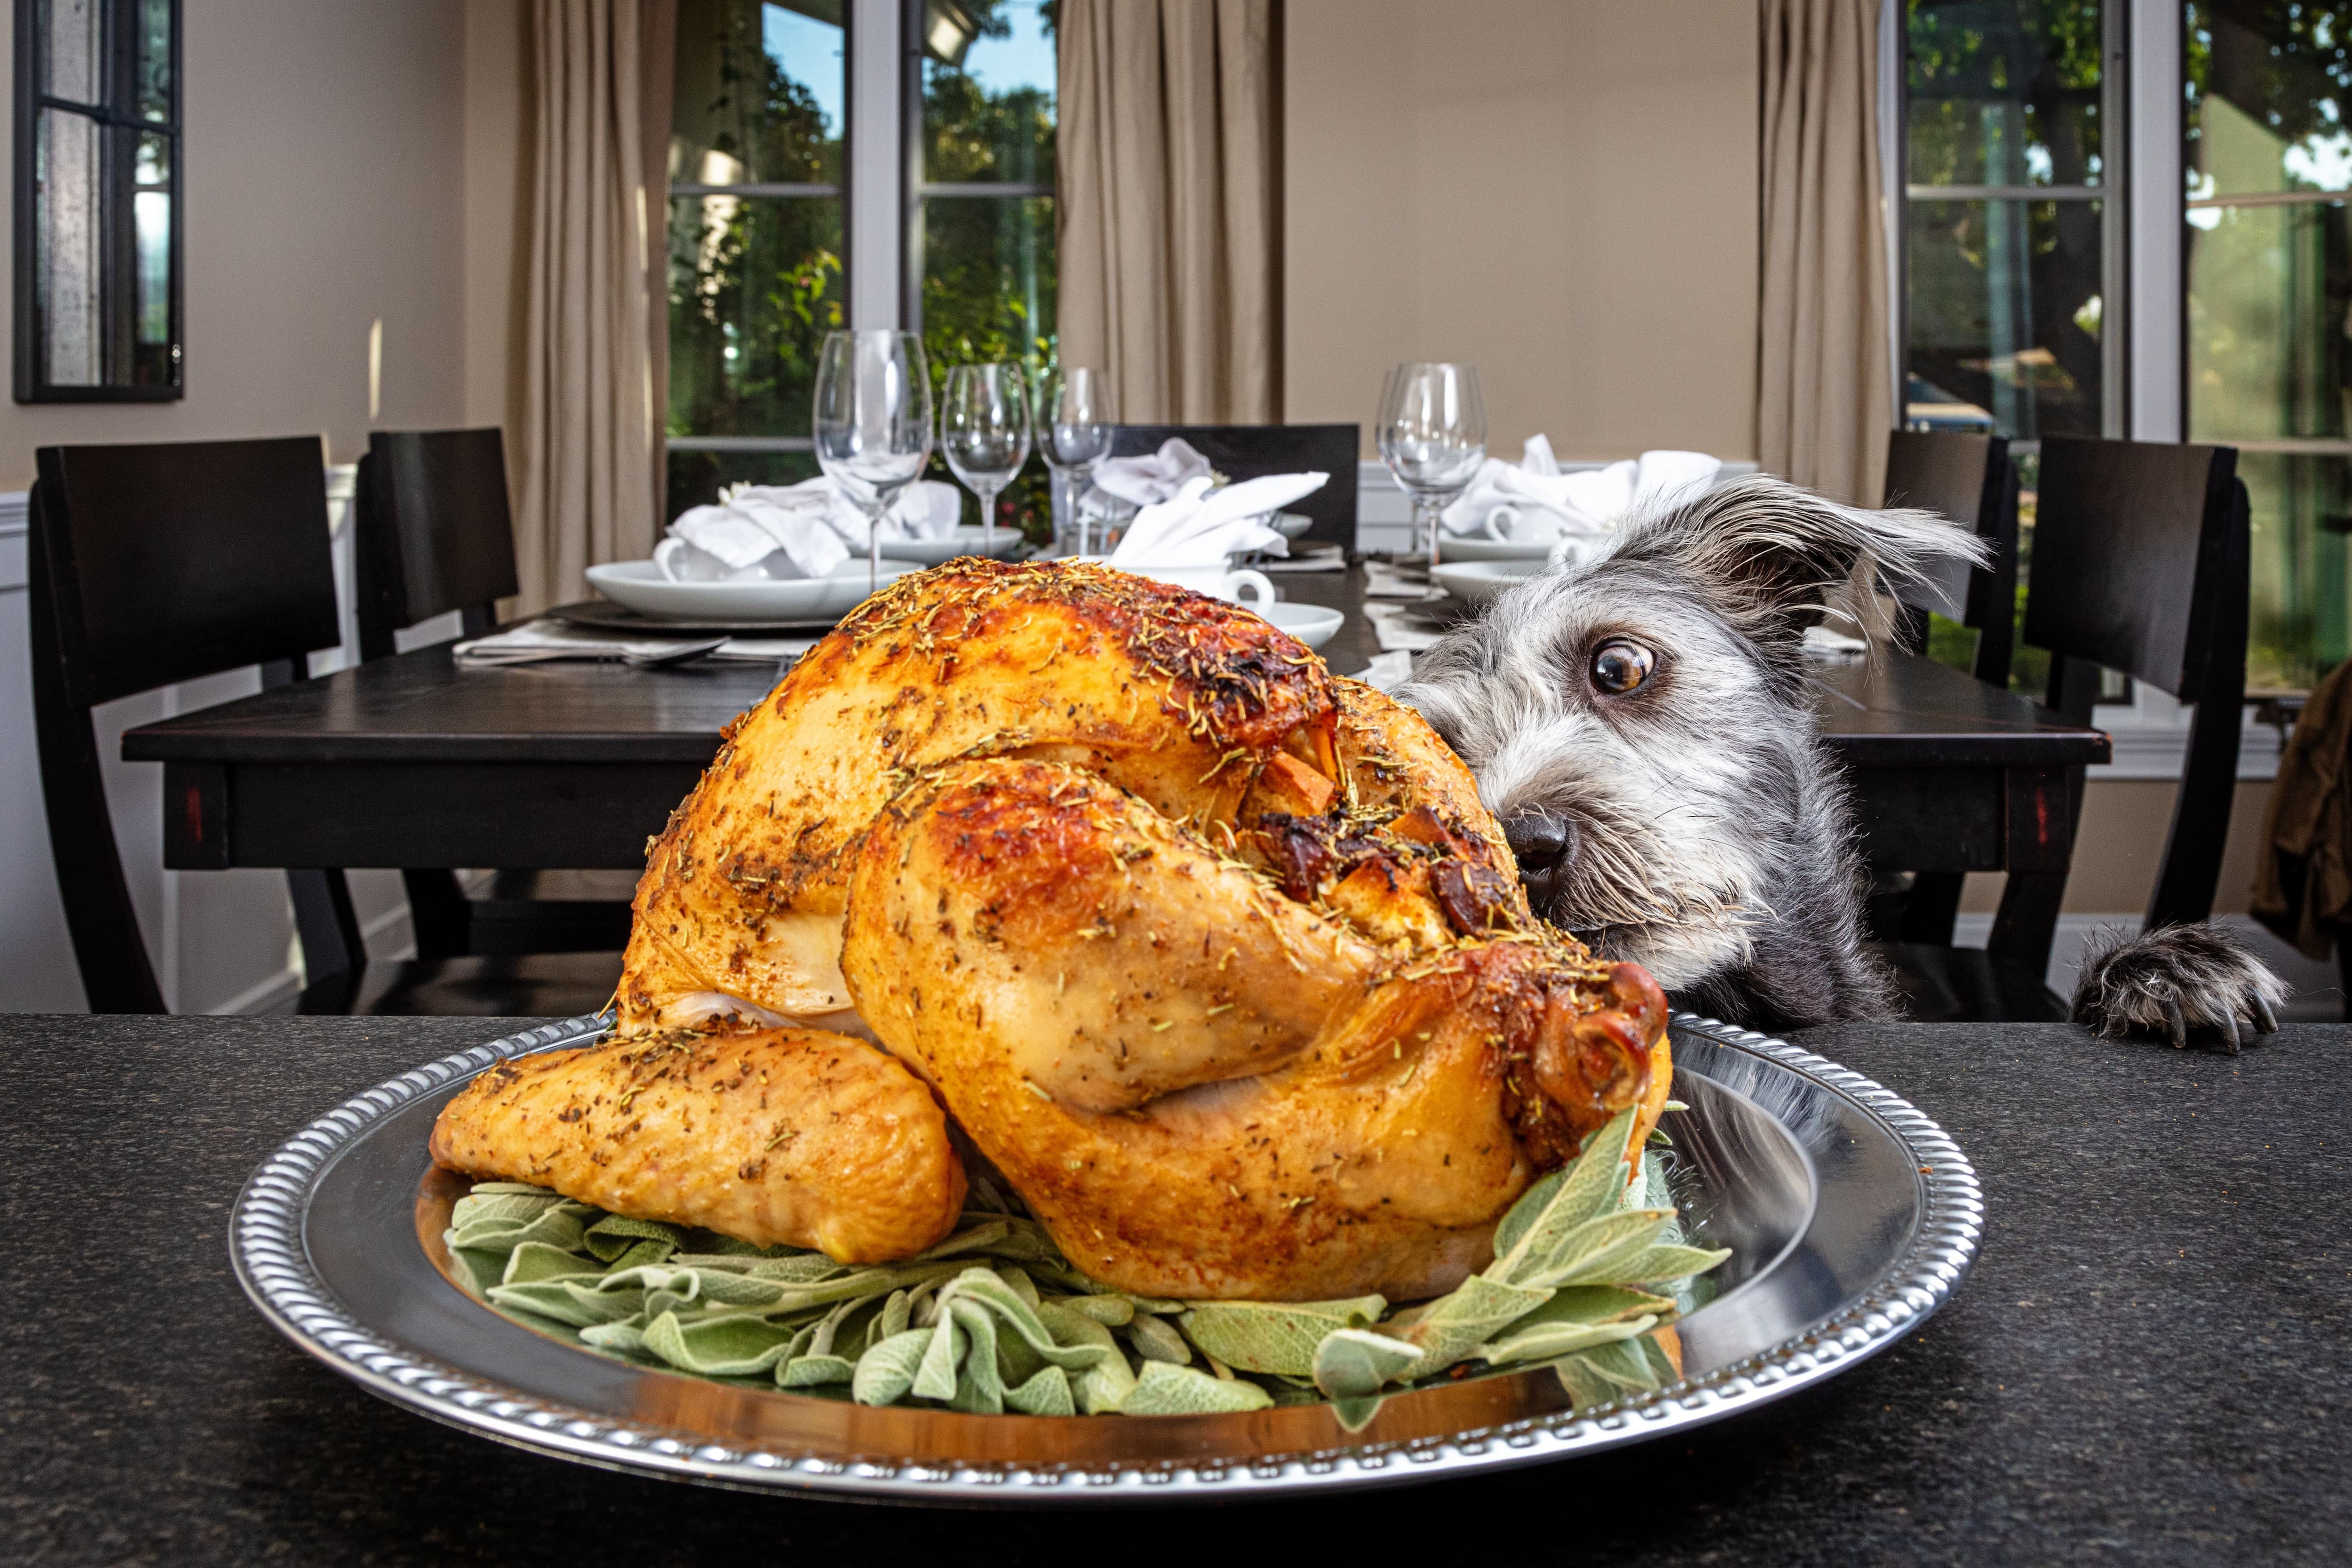 Thanksgiving disasters: What does homeowners insurance bring to the table?